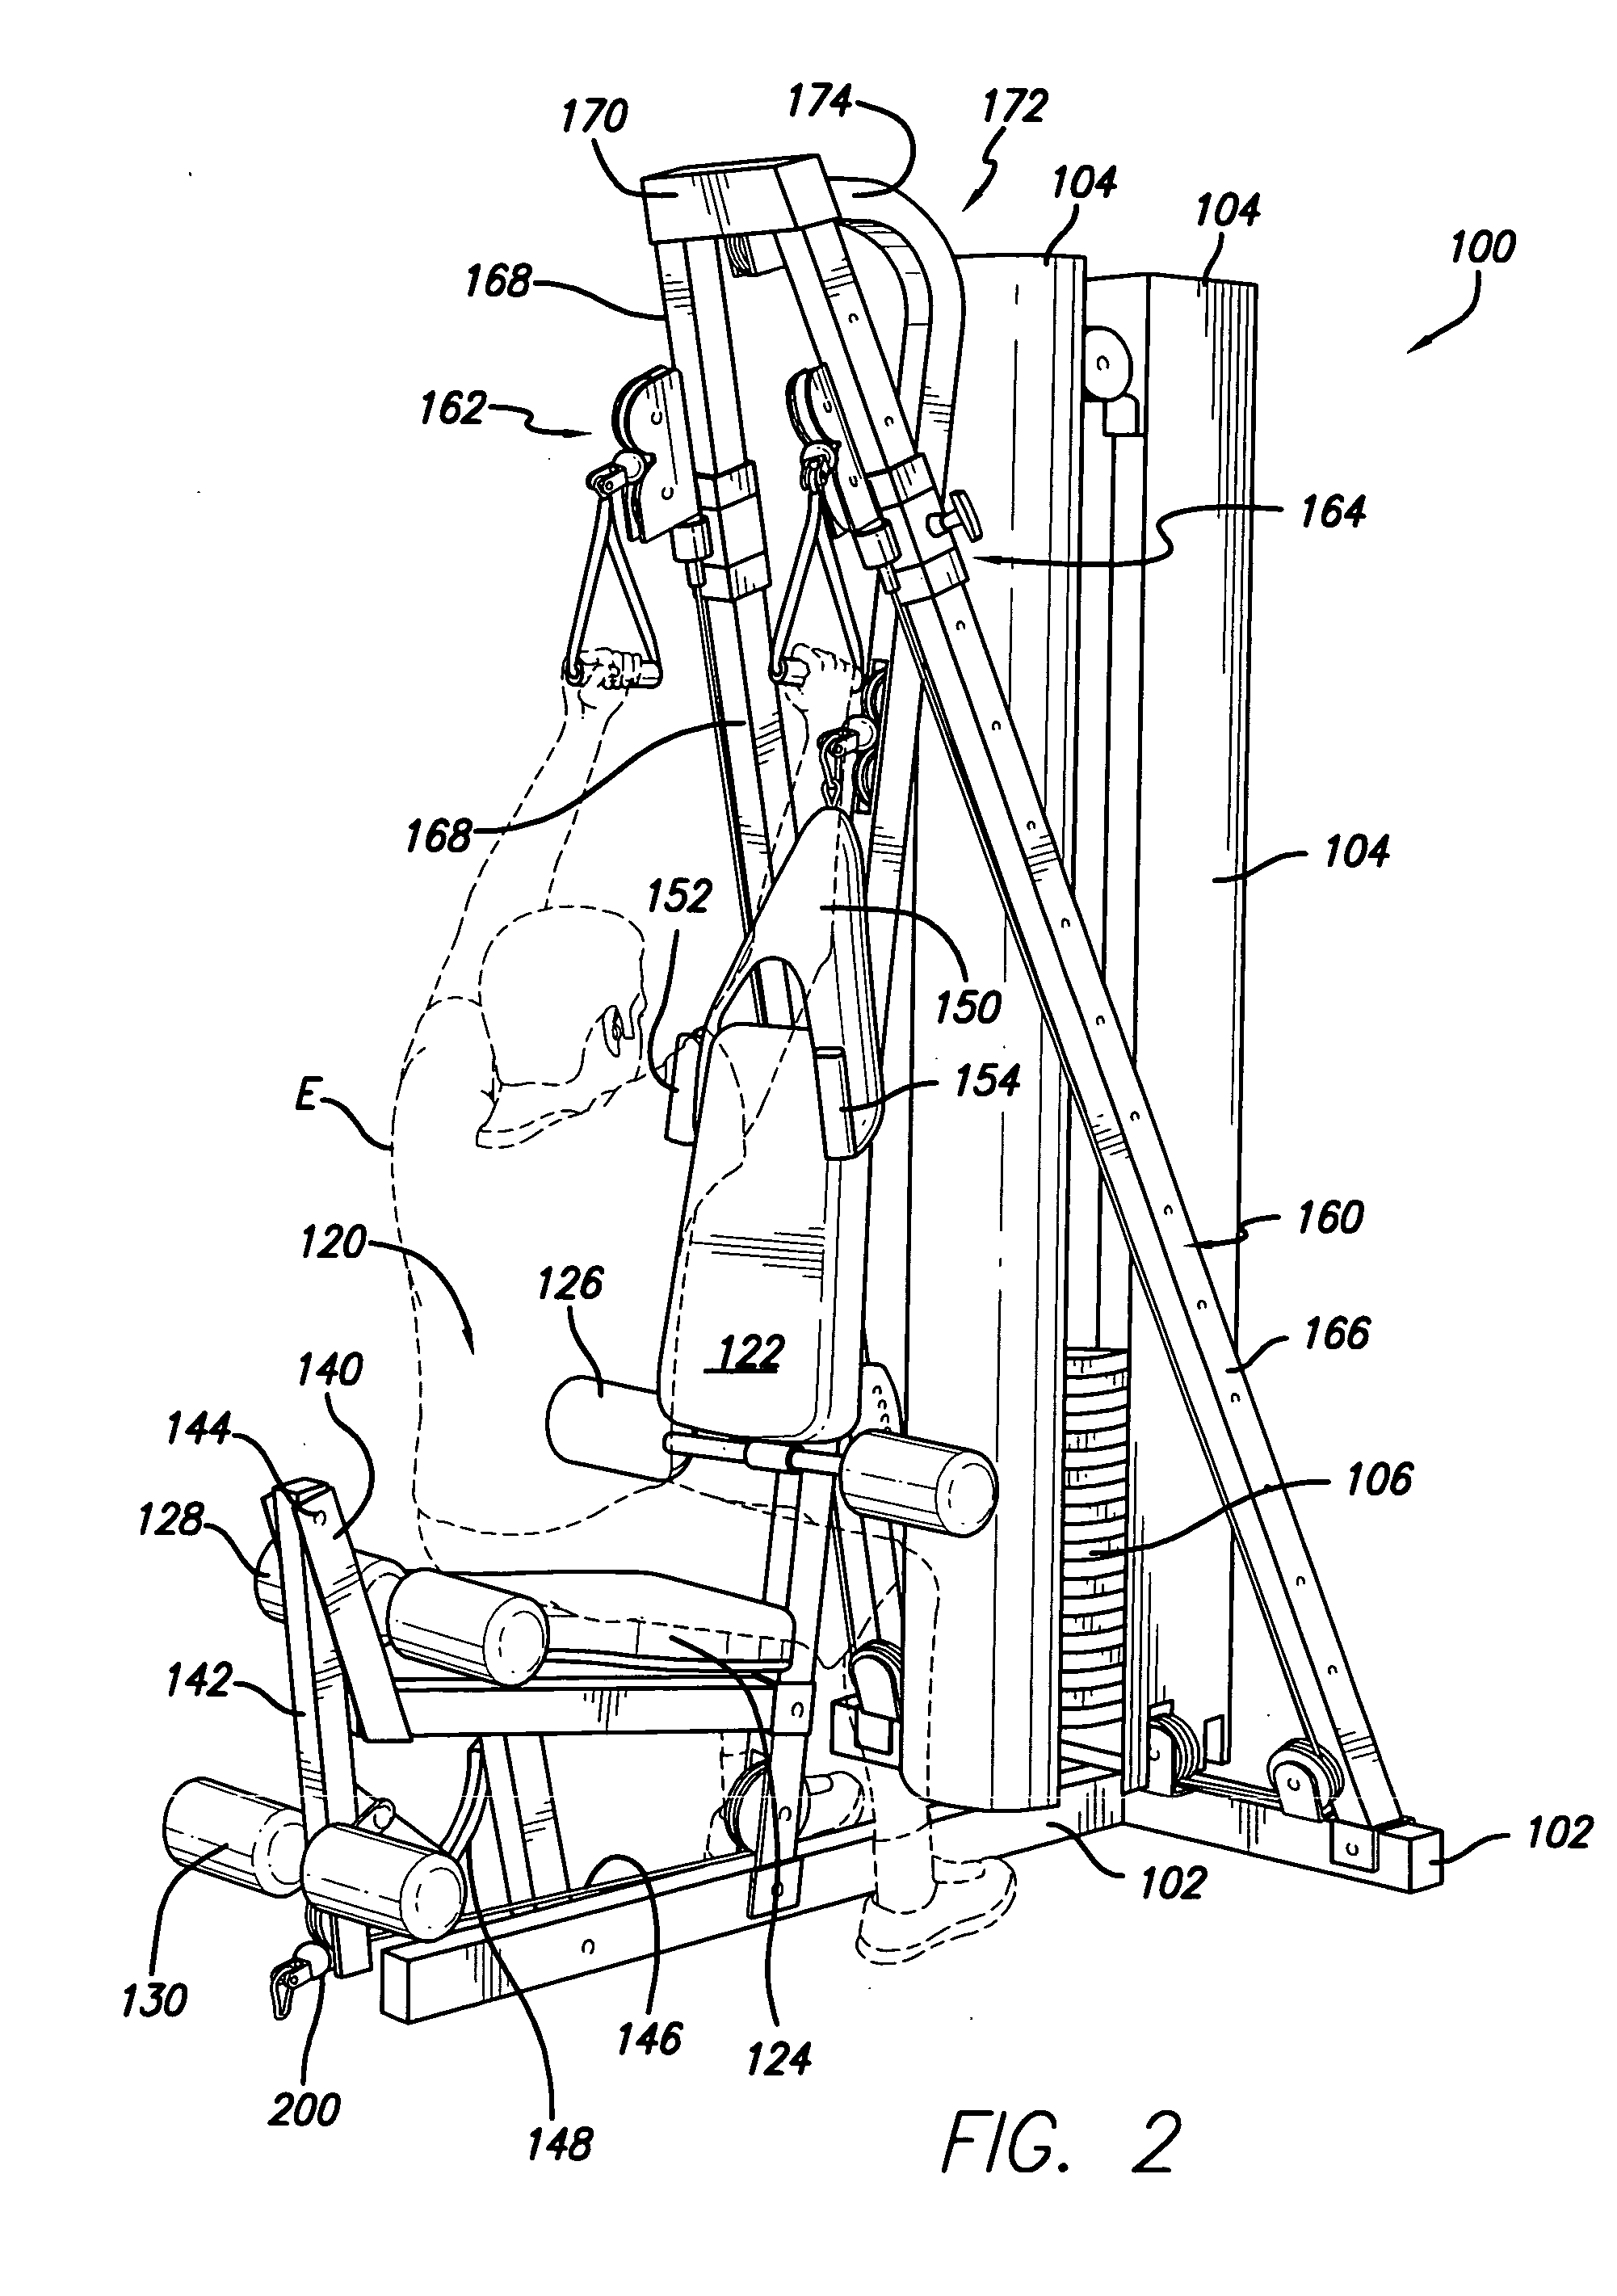 Adjustable cable systems device